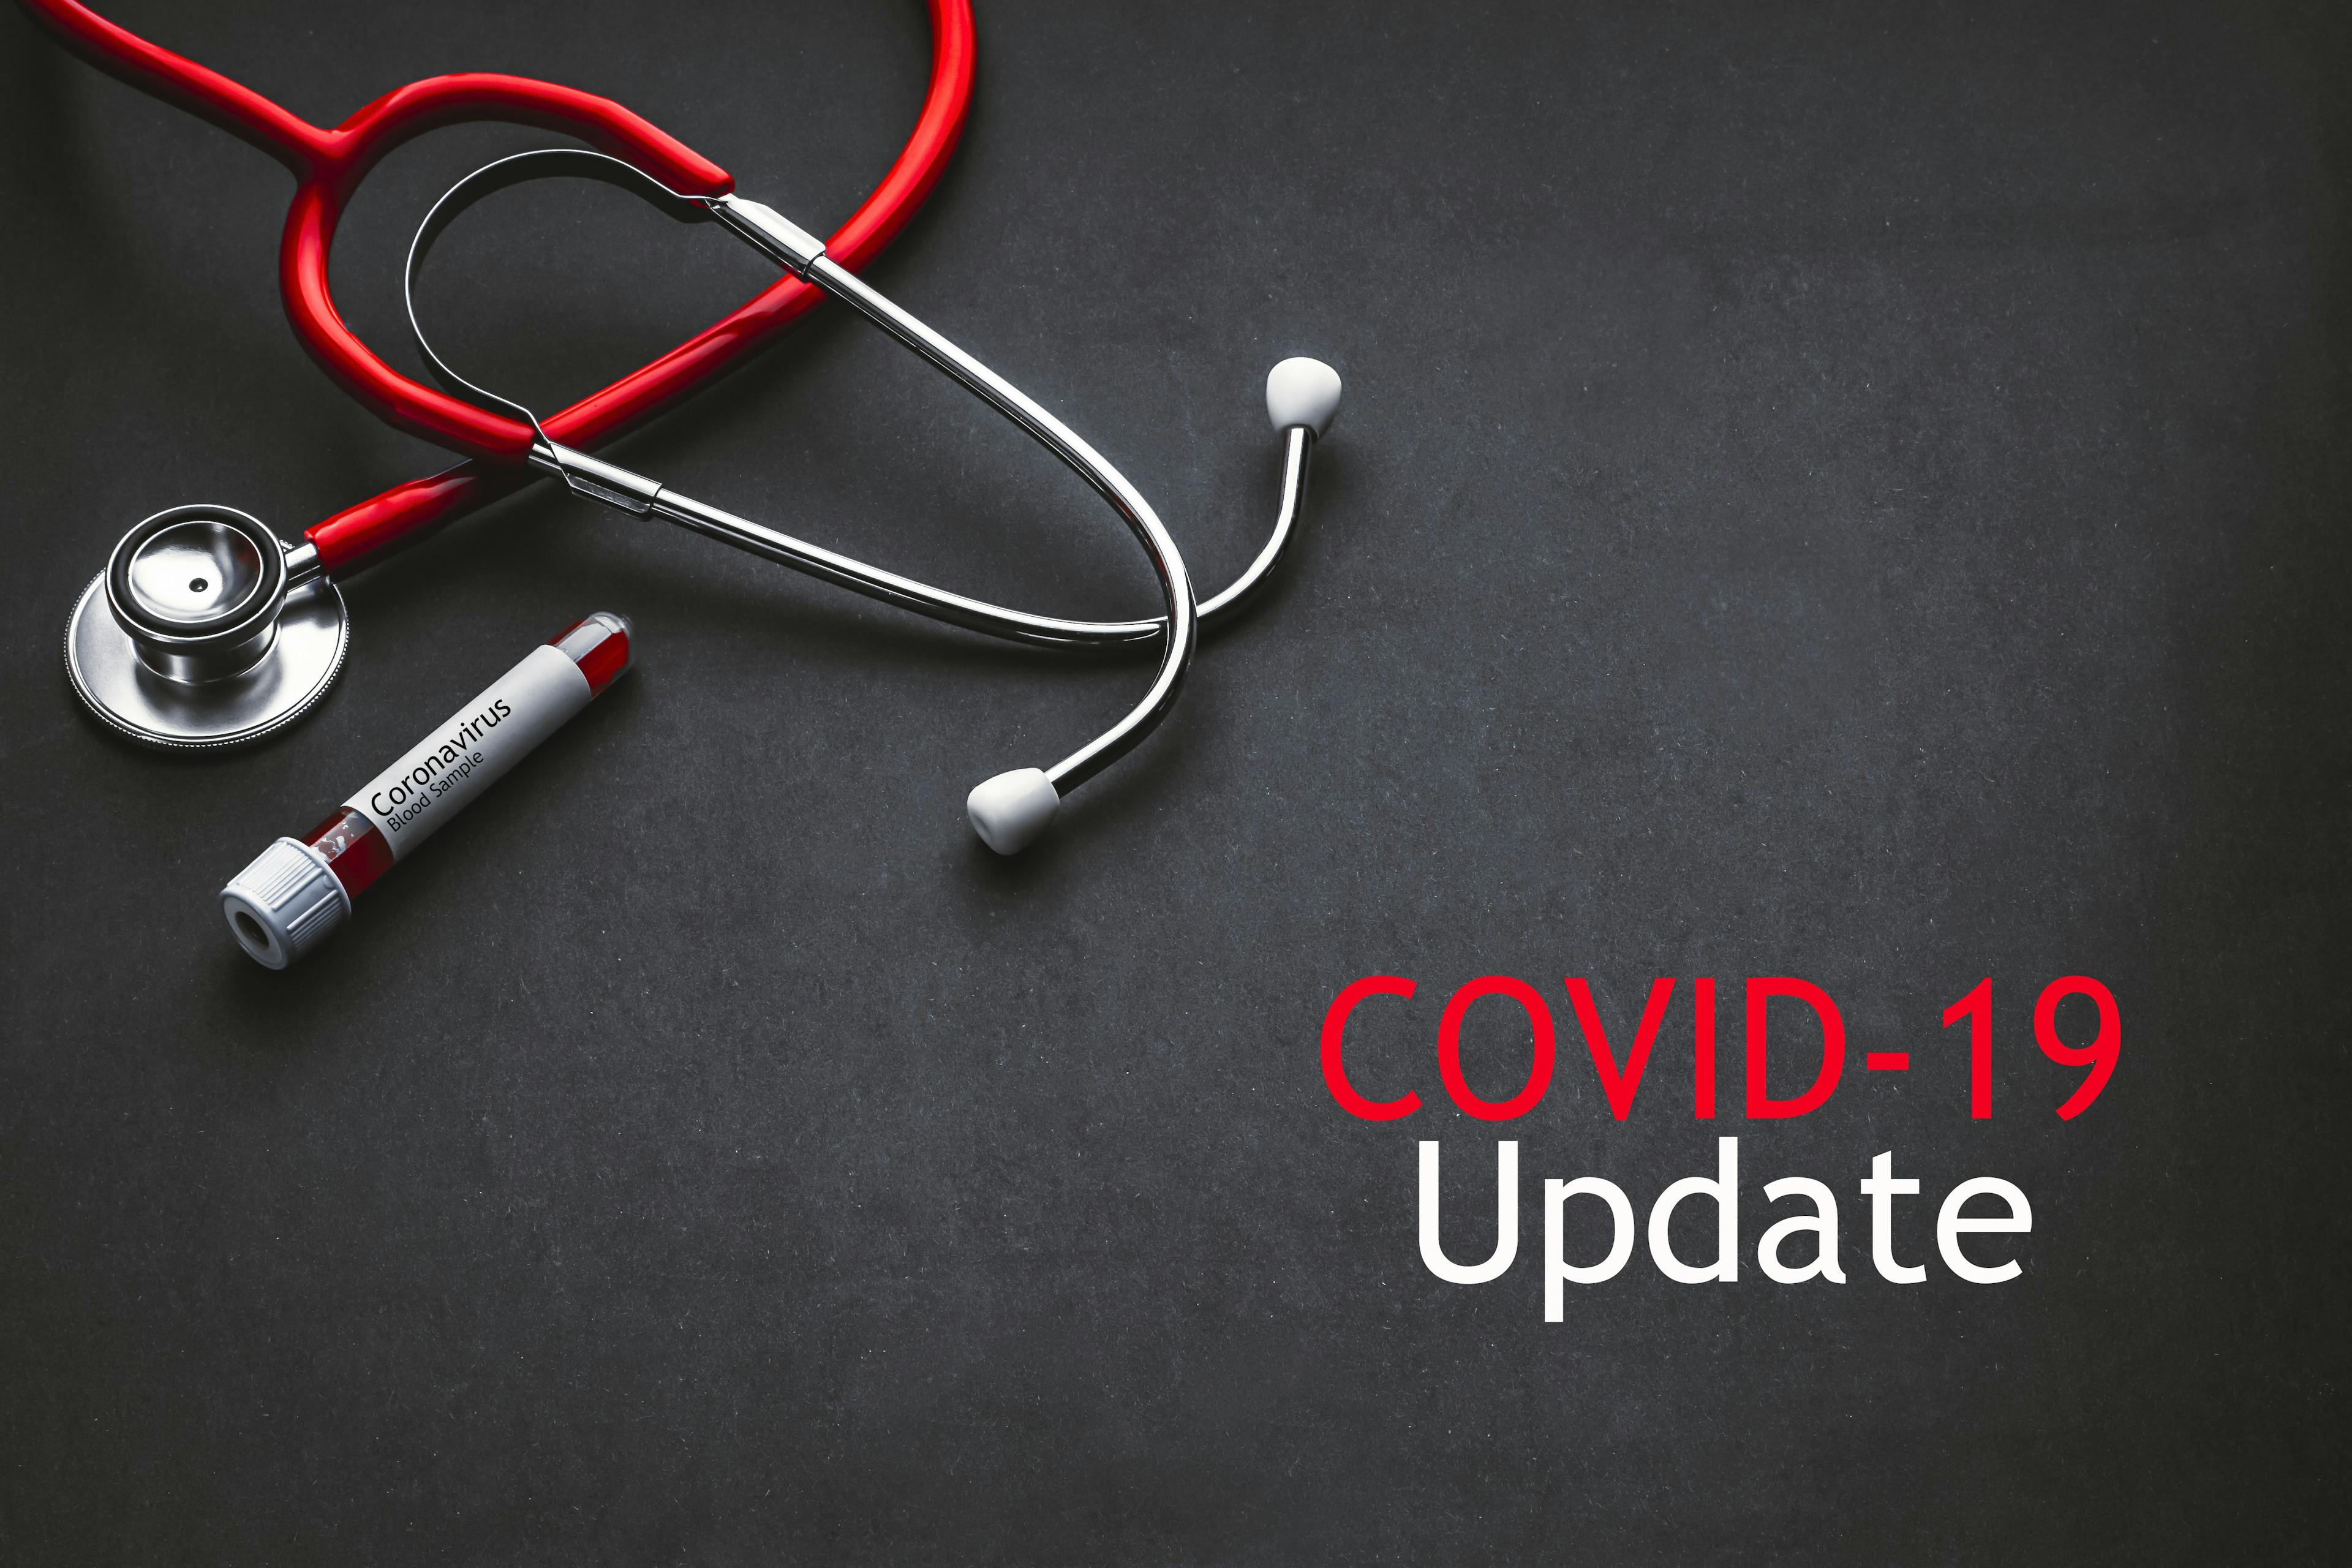 COVID-19 Update: Global Cases and Recoveries as of July 8, 2020